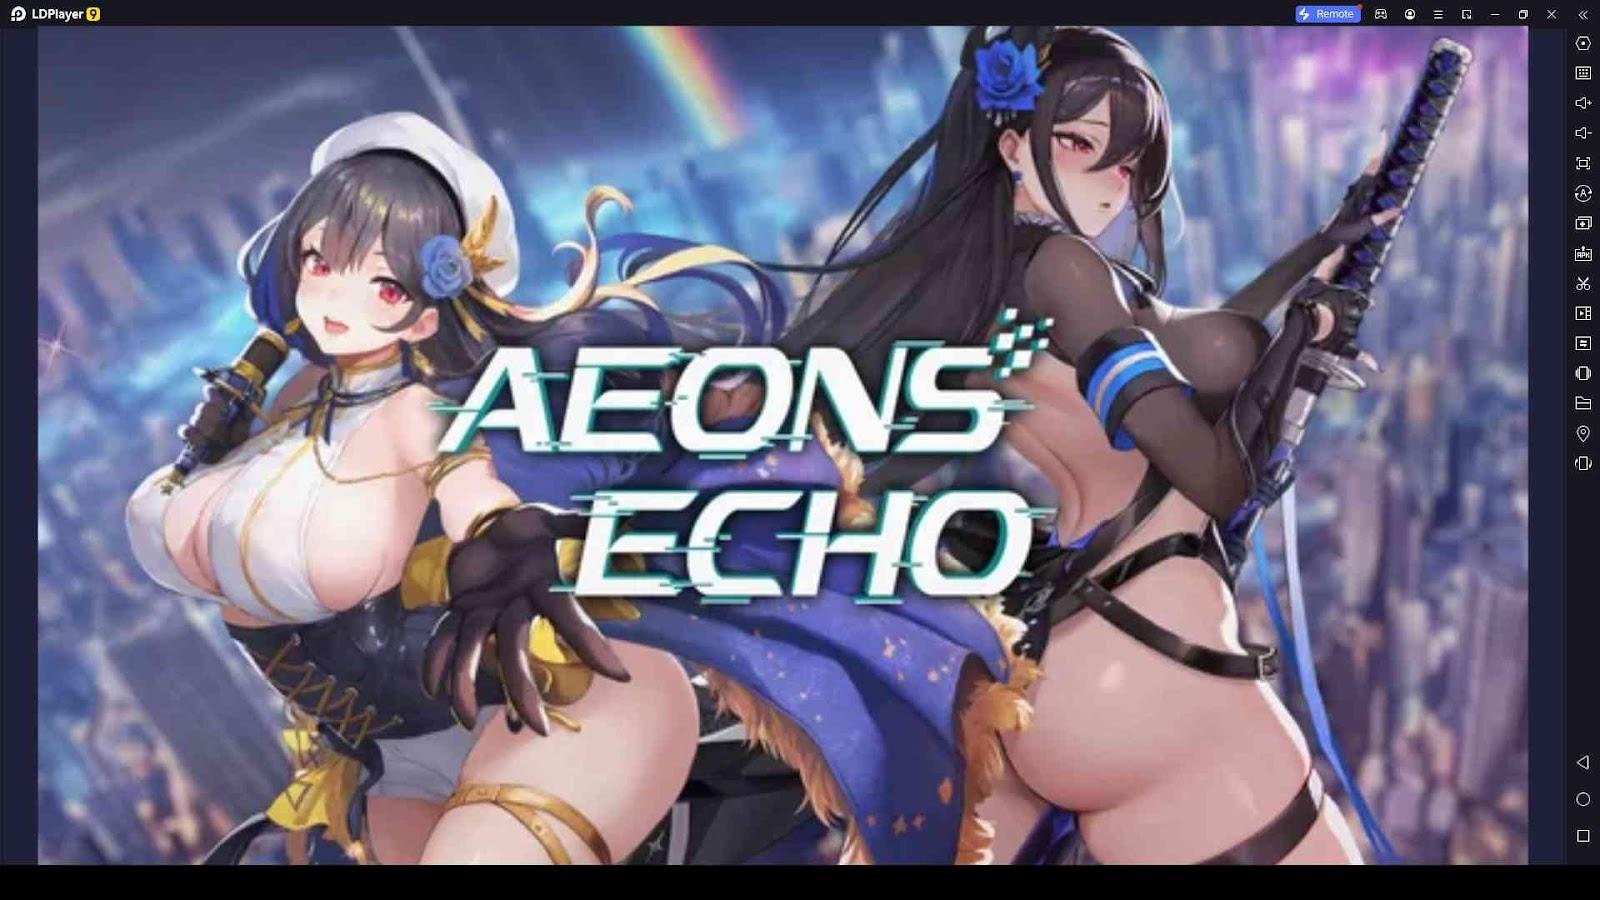 Beginner's Guide to Aeons echo